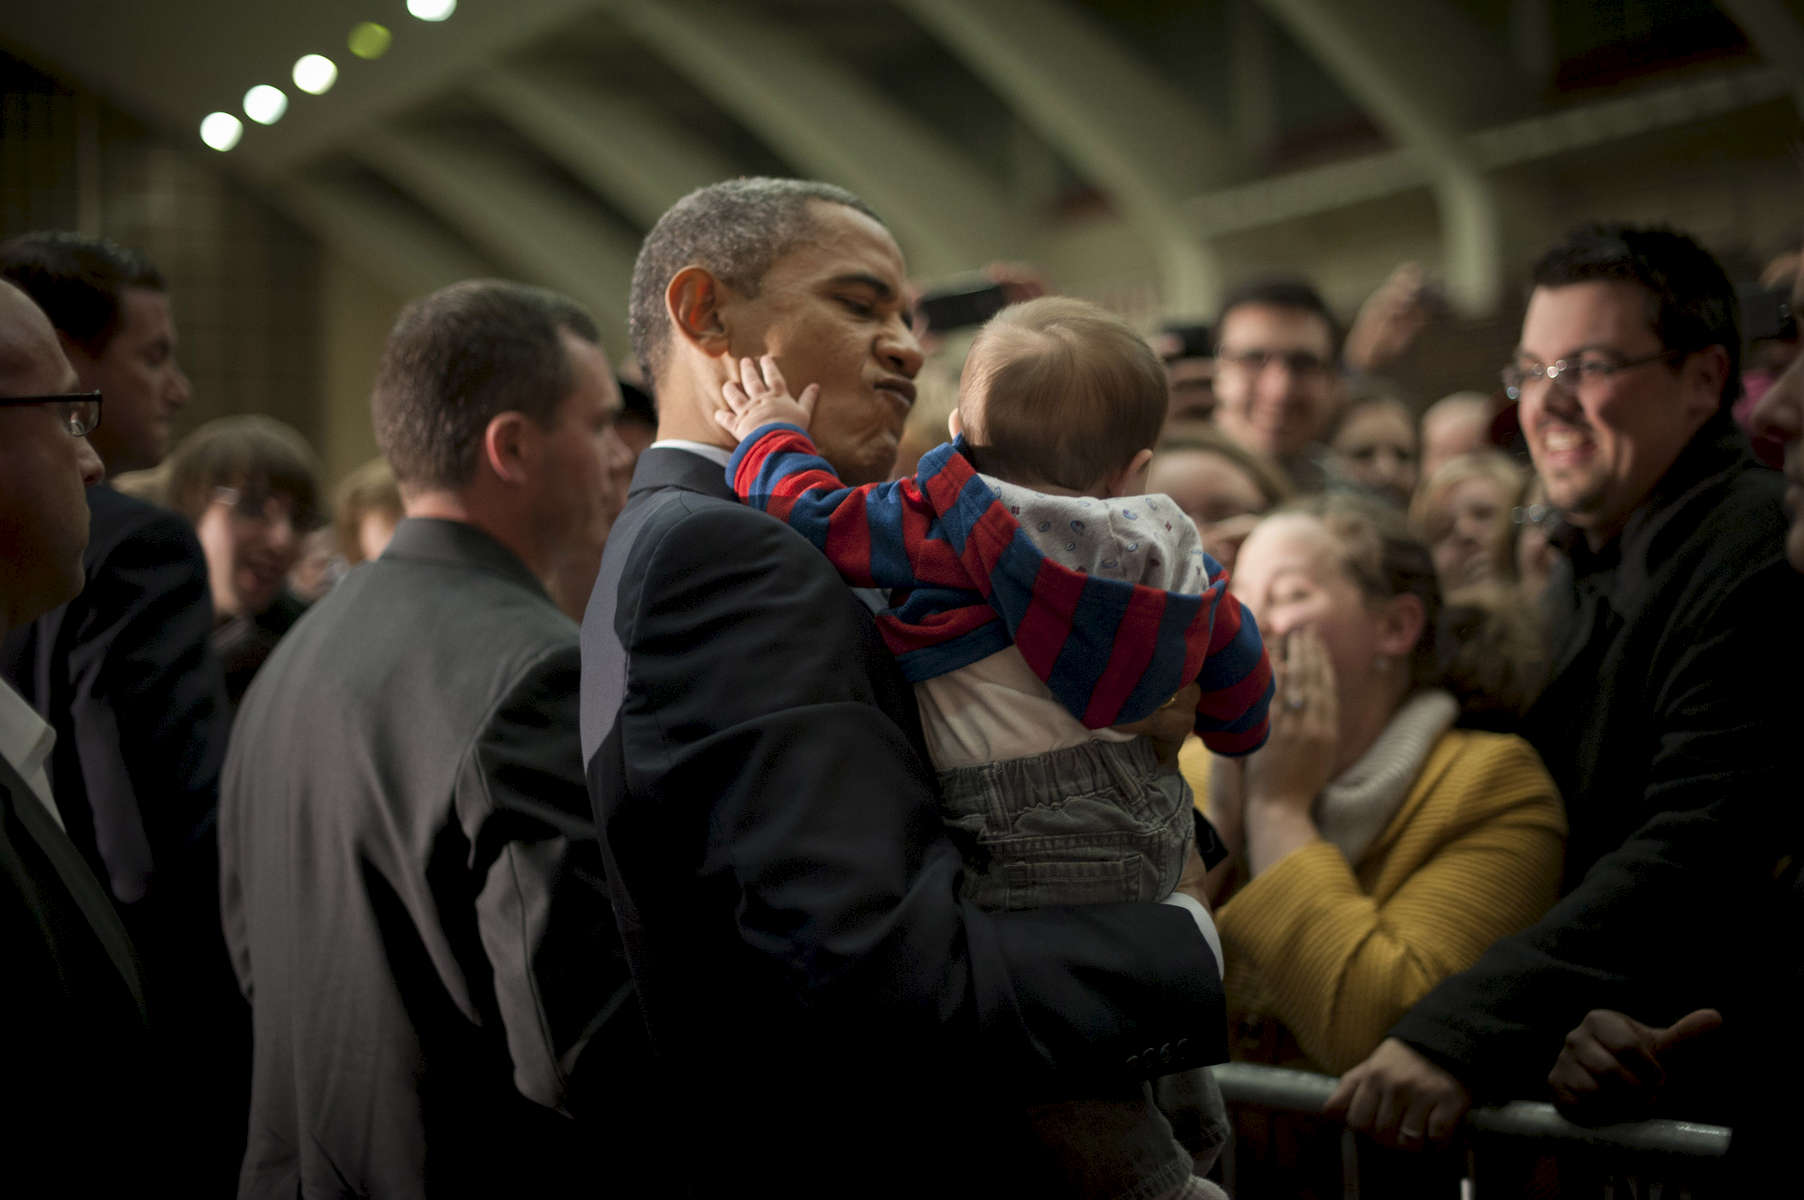 November 4, 2012 - Cincinnati, OH: President Barack Obama makes a face at a baby after speaking to an overflow crowd in Cincinnati.  (Scout Tufankjian for Obama for America/Polaris)